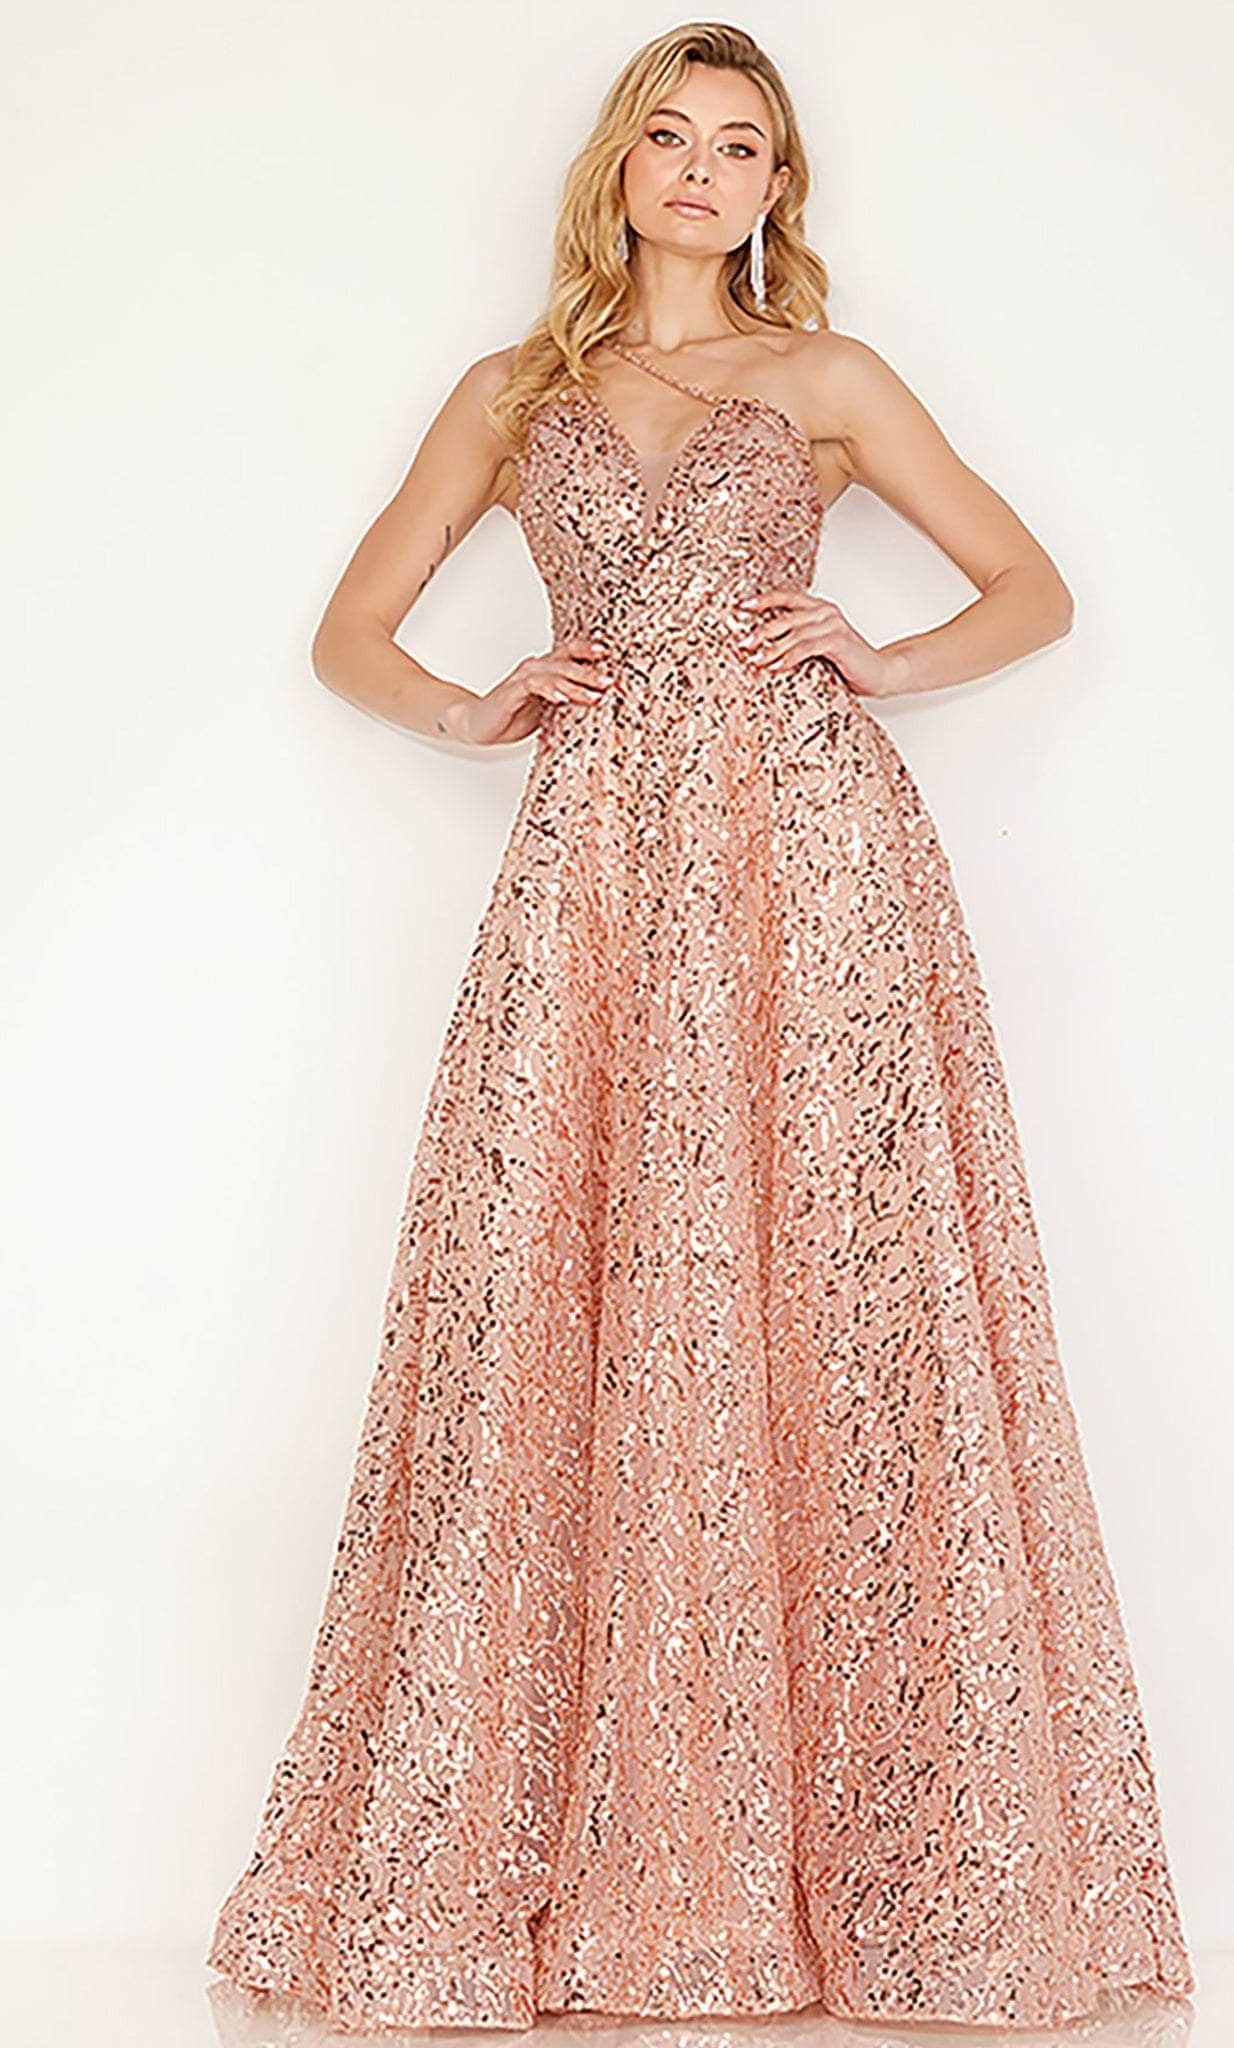 Cecilia Couture 192 - Embellished A-line Evening Gown
